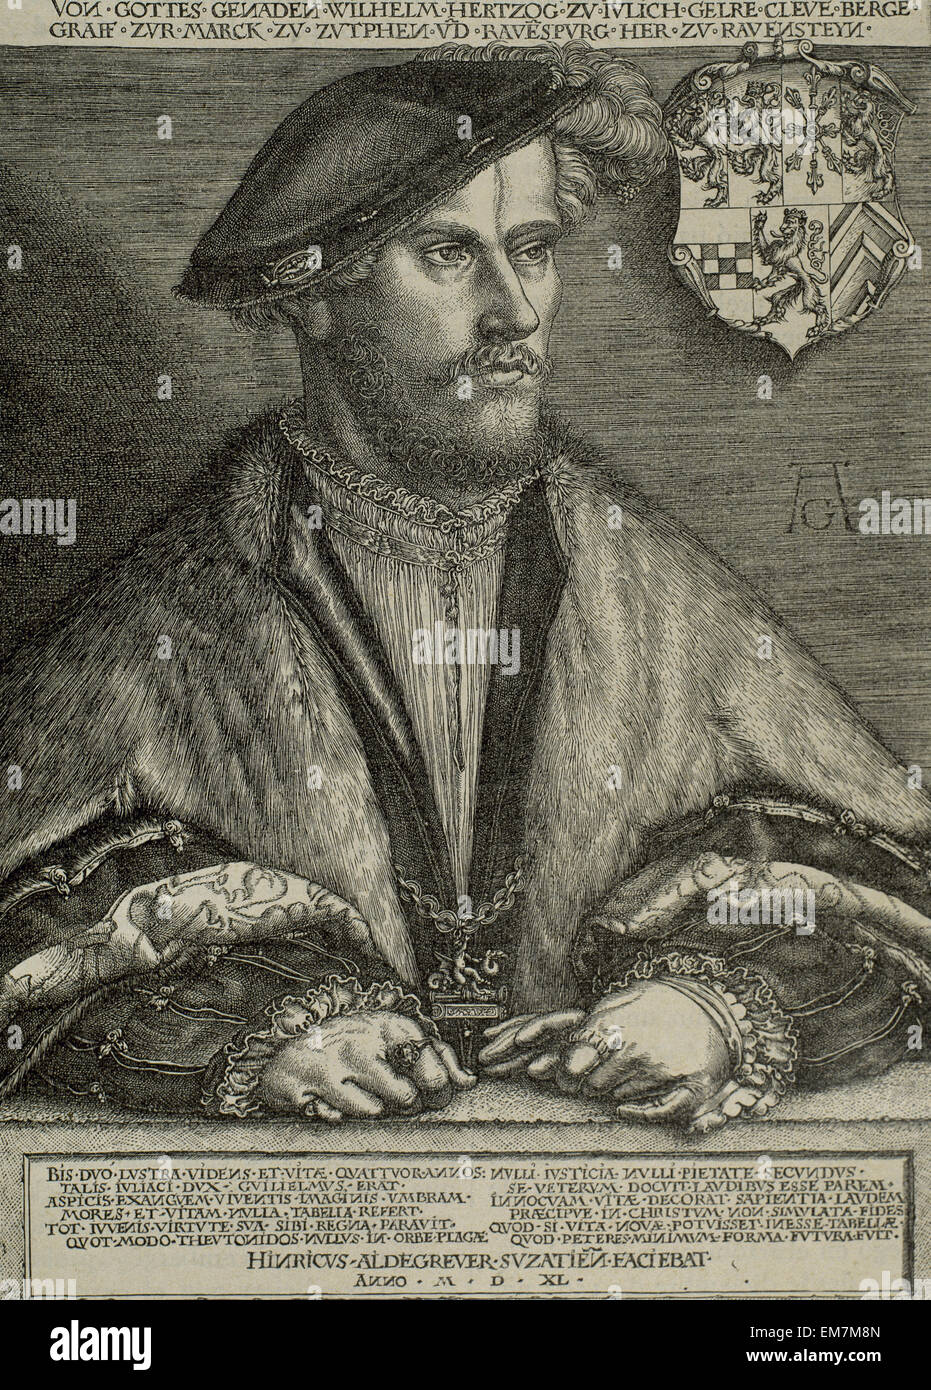 William of Julich-Cleves-Berge (1516-1592). Duke of Julich-Cleves-Berg. Portrait. Engraving by Enrique Aldegrever (1502-1562), 1540. Stock Photo